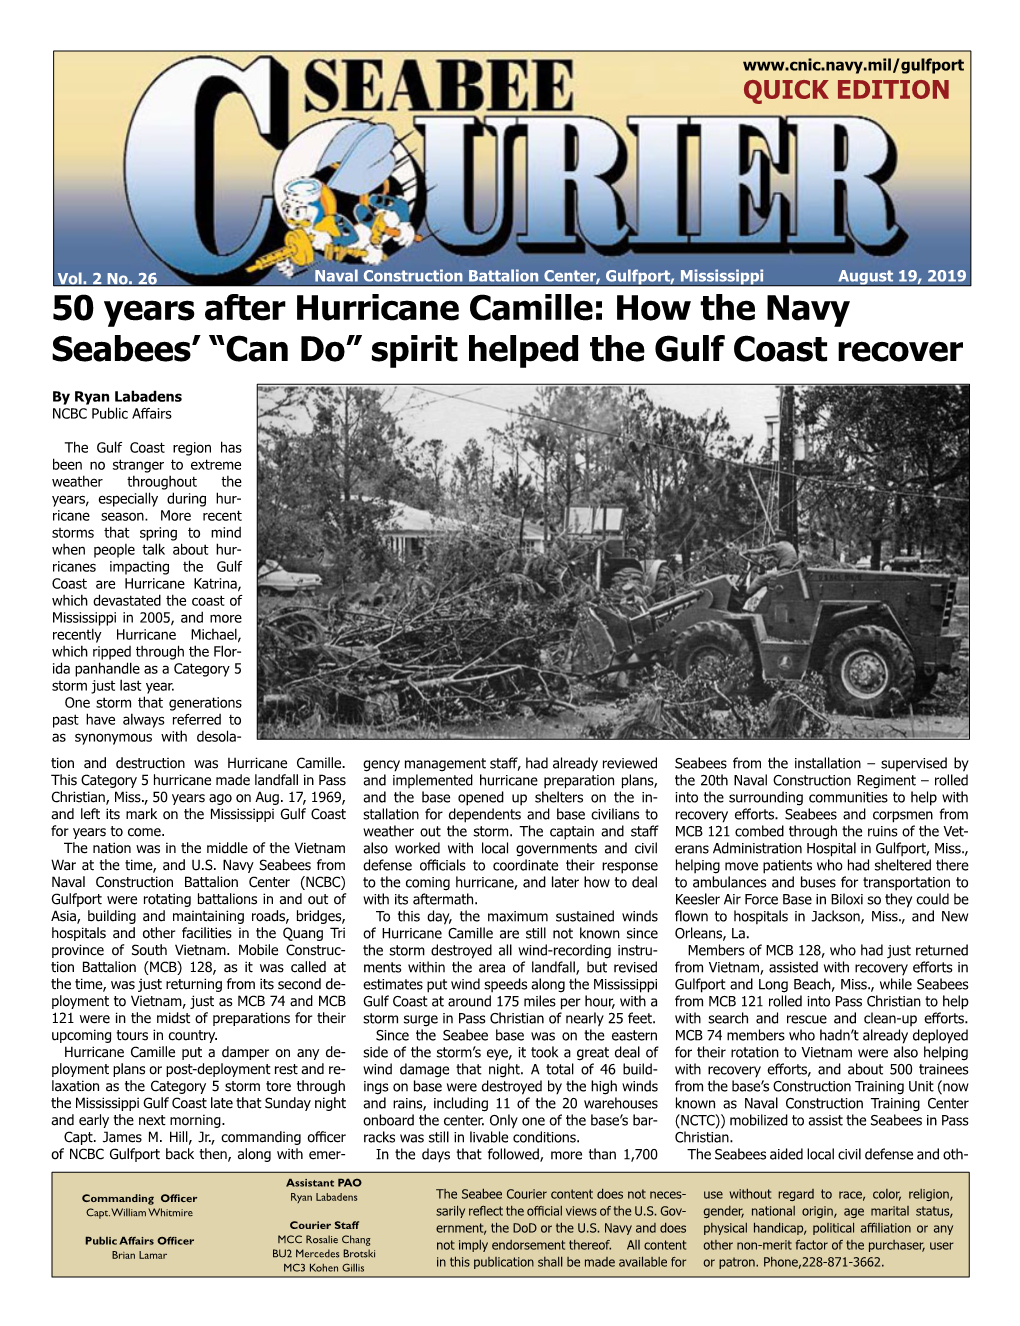 50 Years After Hurricane Camille: How the Navy Seabees' “Can Do” Spirit